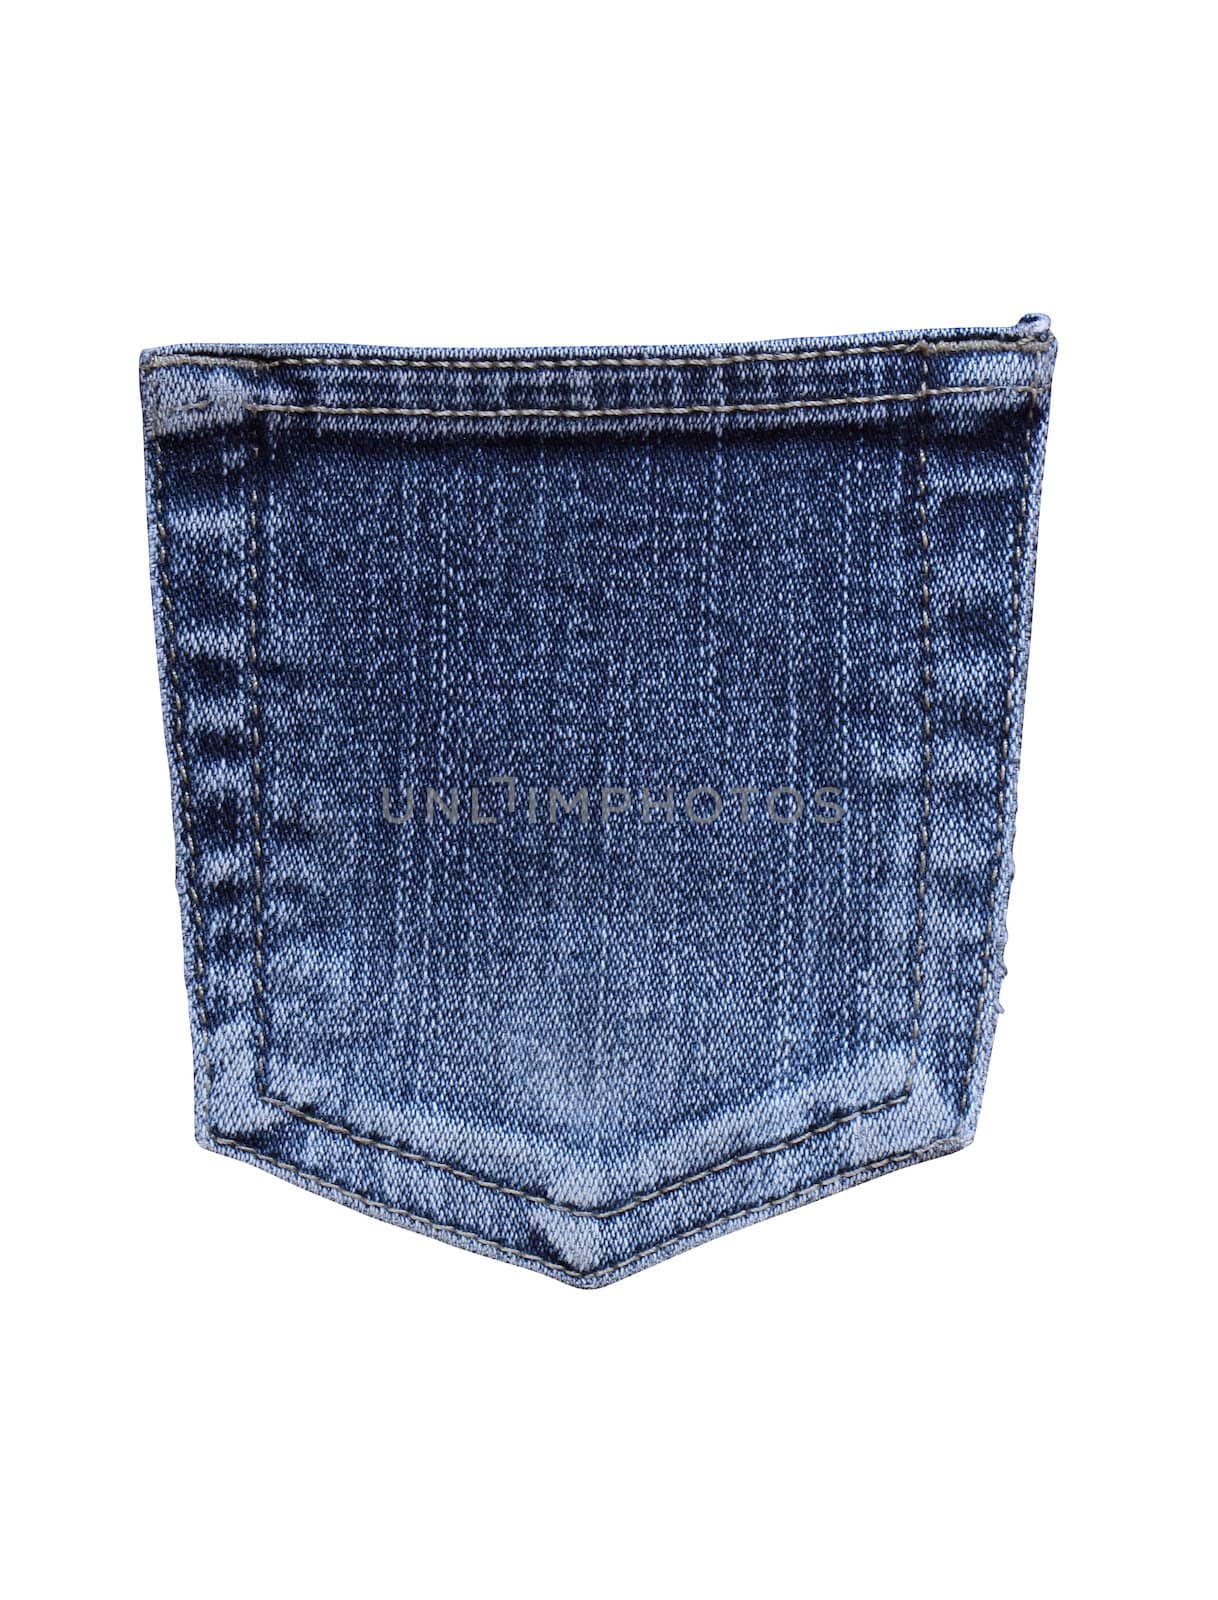 Blue jeans back pocket isolated on white with clipping path